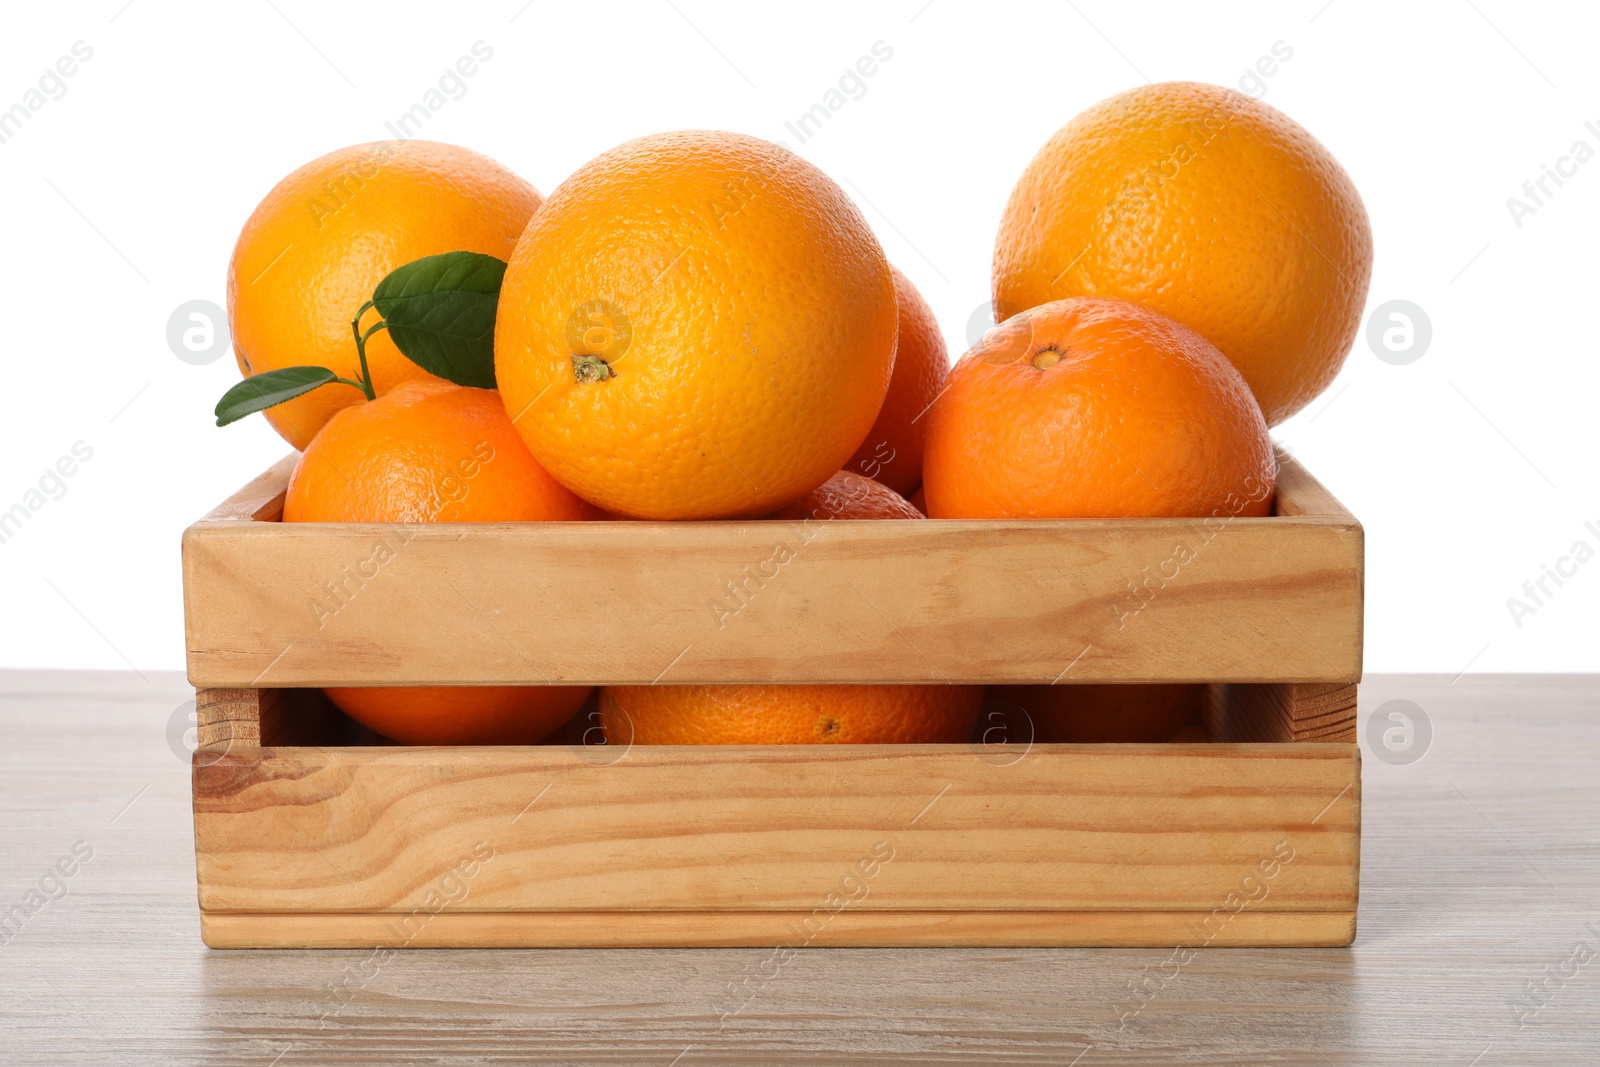 Photo of Fresh oranges in crate on light wooden table against white background